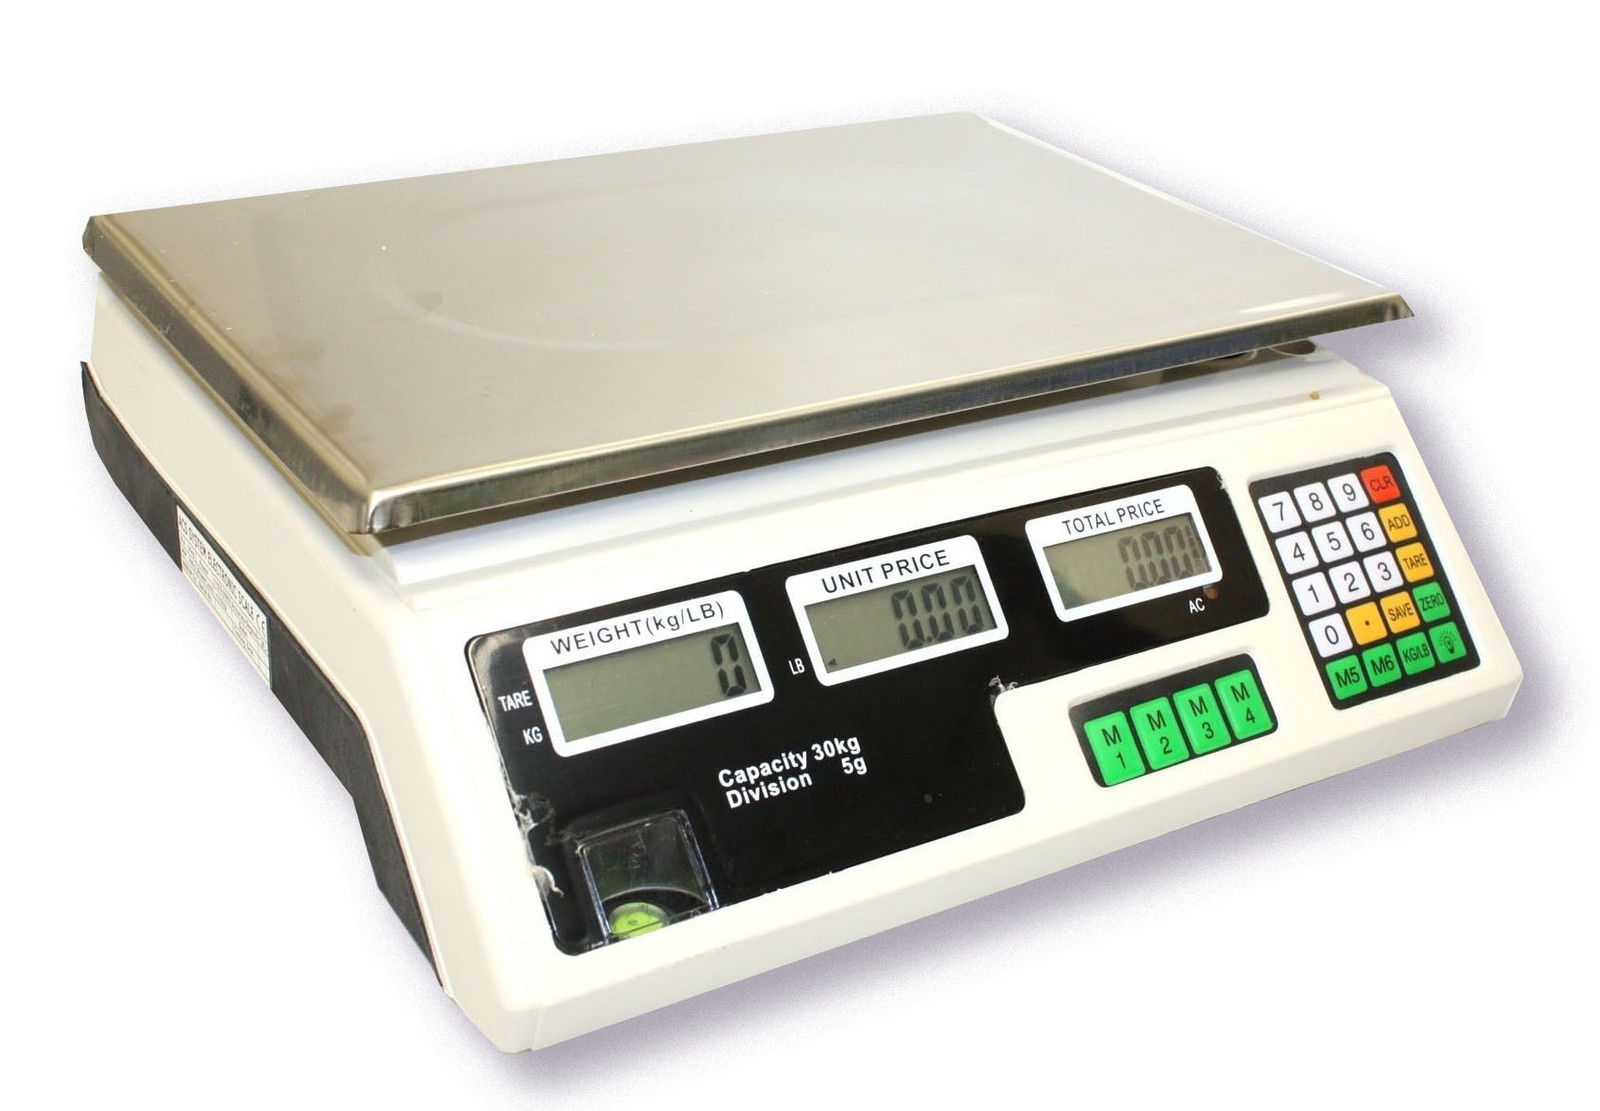 66 Lbs Digital Weight Scale Price Computing Retail Count Scale